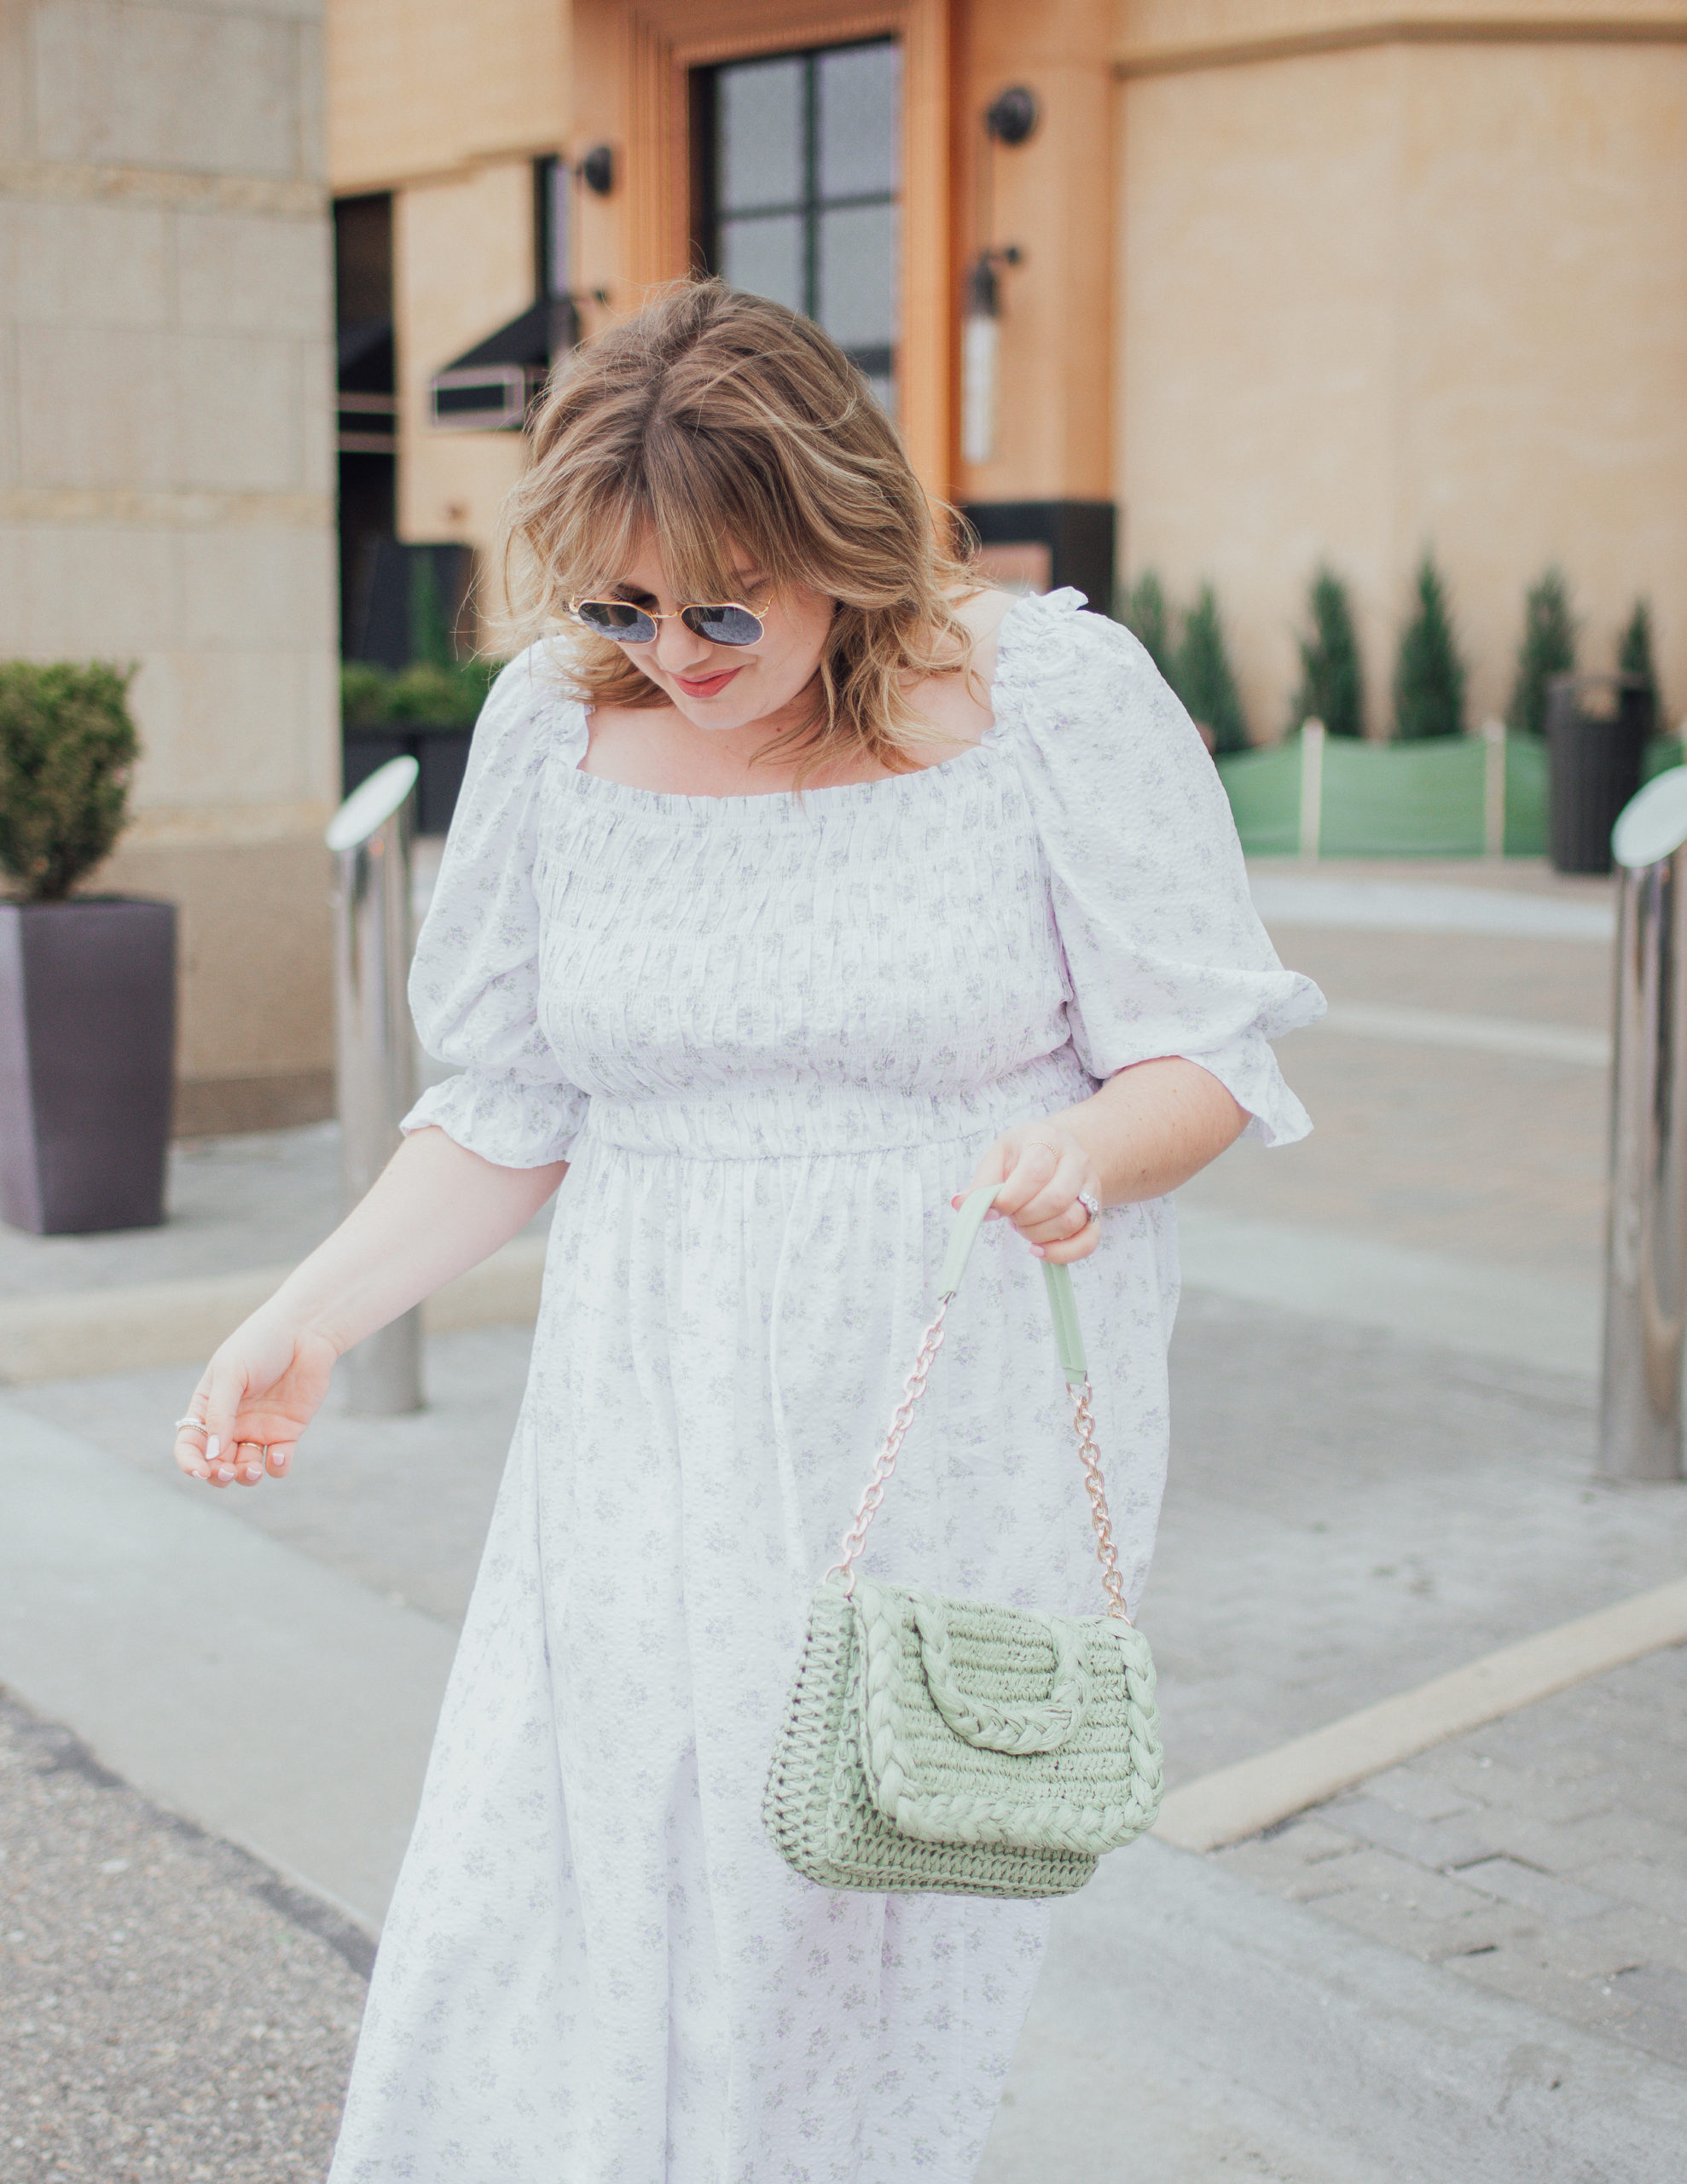 Sharing a mothers day outfit idea from Twelve Oaks Mall, and a few of my favorite stores at Twelve Oaks located in Novi Michigan. 